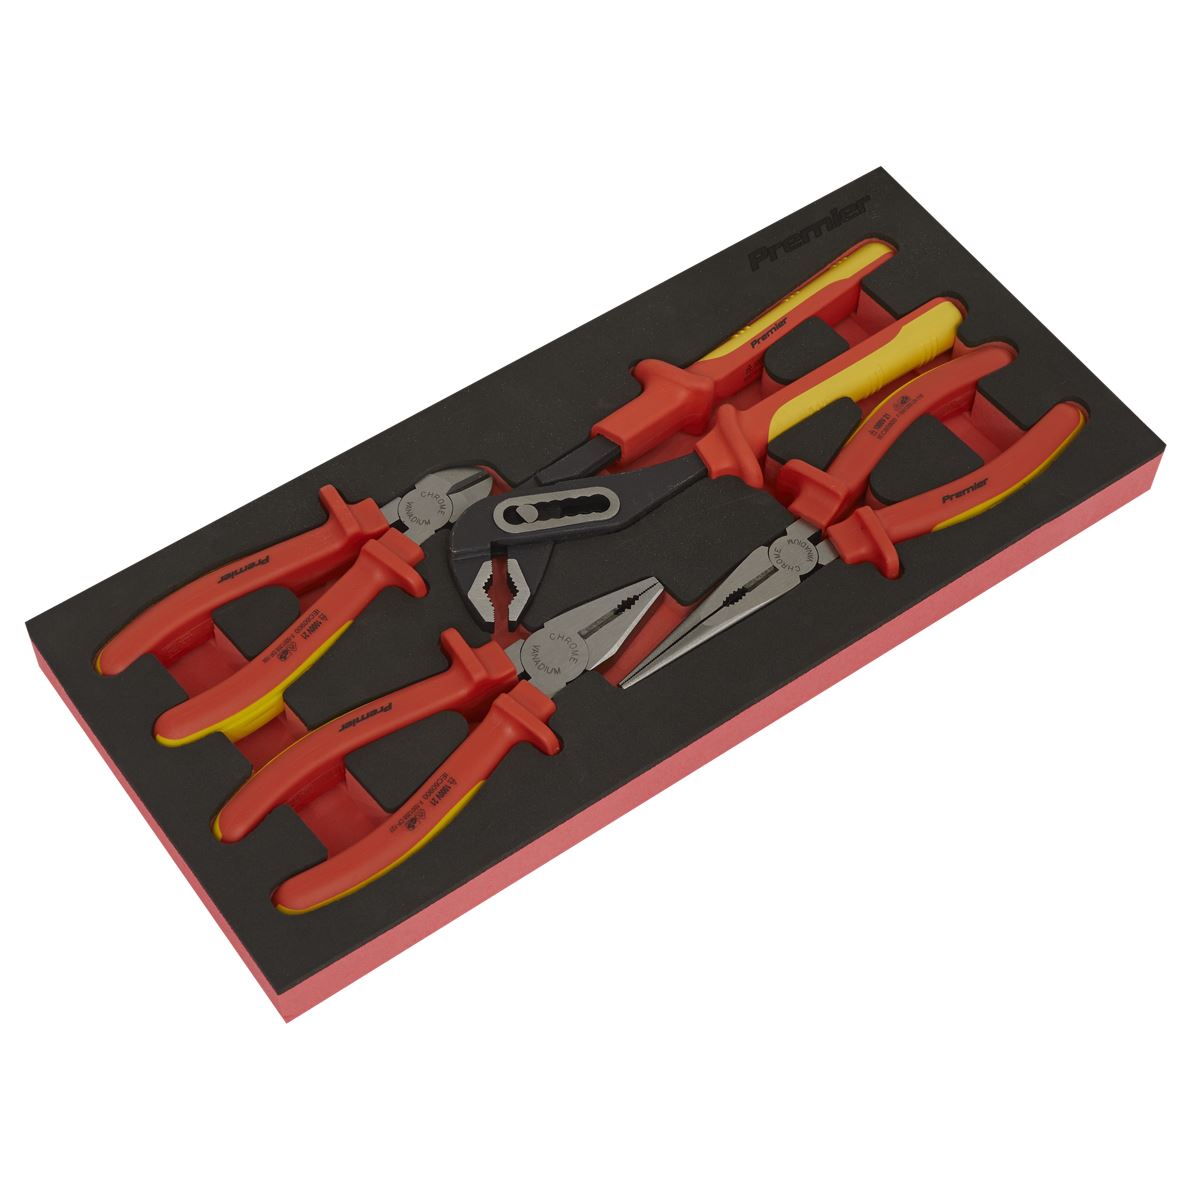 Sealey Premier Insulated Pliers Set 4pc with Tool Tray - VDE Approved